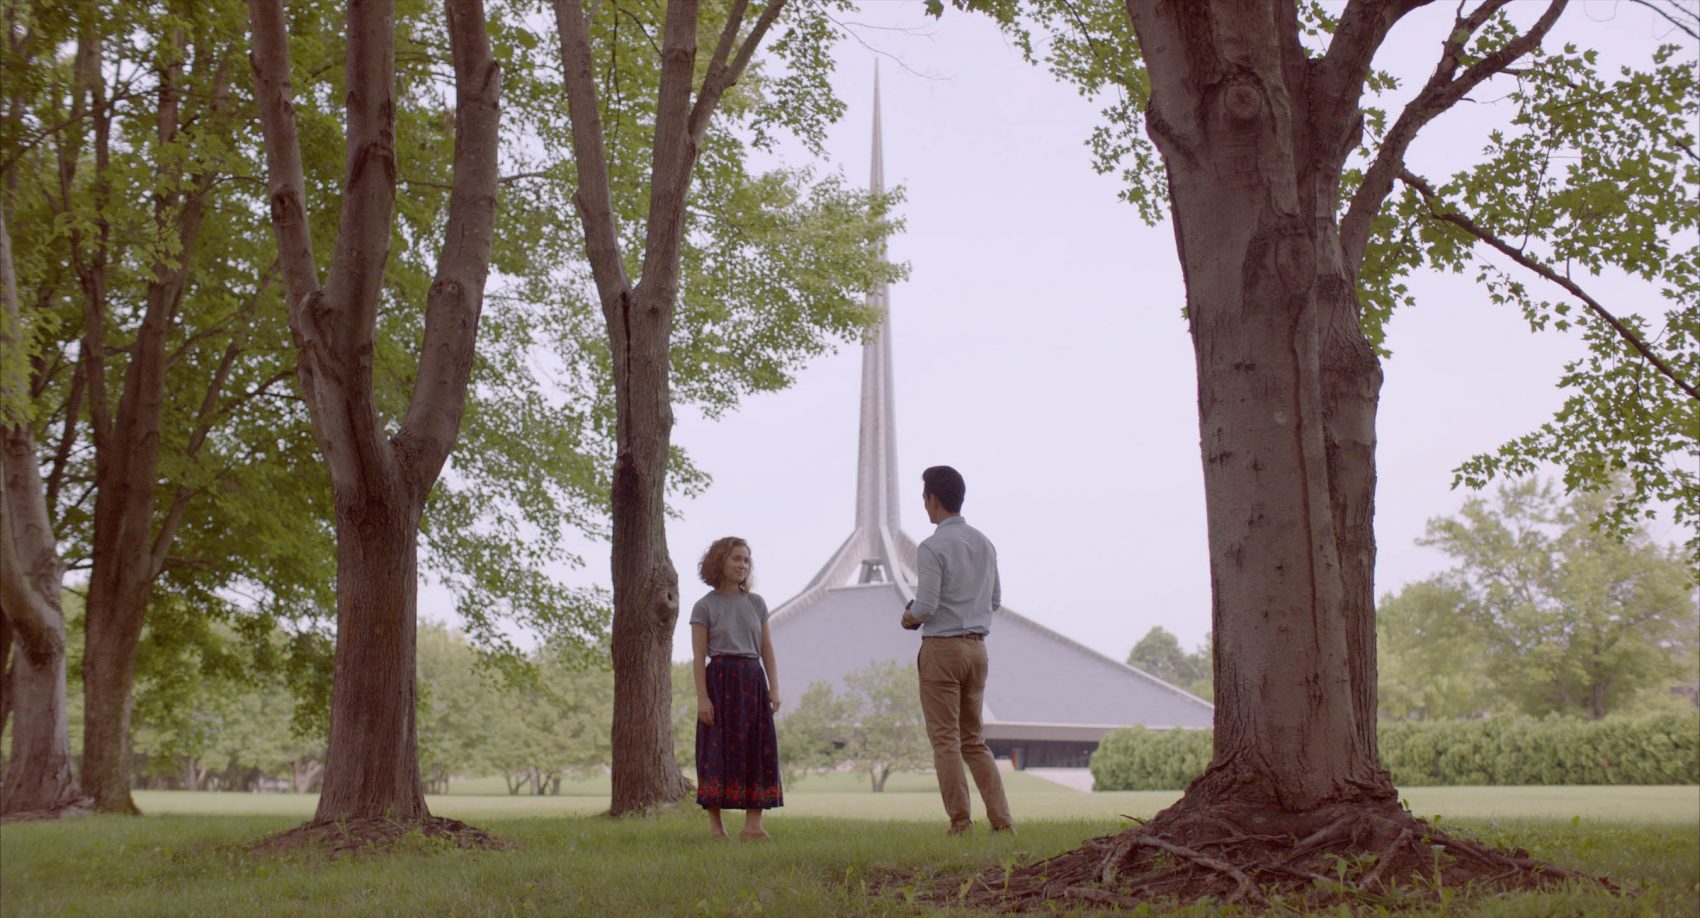 Haley Lu Richardson and John Cho star in &quot;Columbus,&quot; playing at the Brattle Theatre. The building in the background is the North Christian Church by architect Eero Saarinen. (Courtesy Elisha Christian)